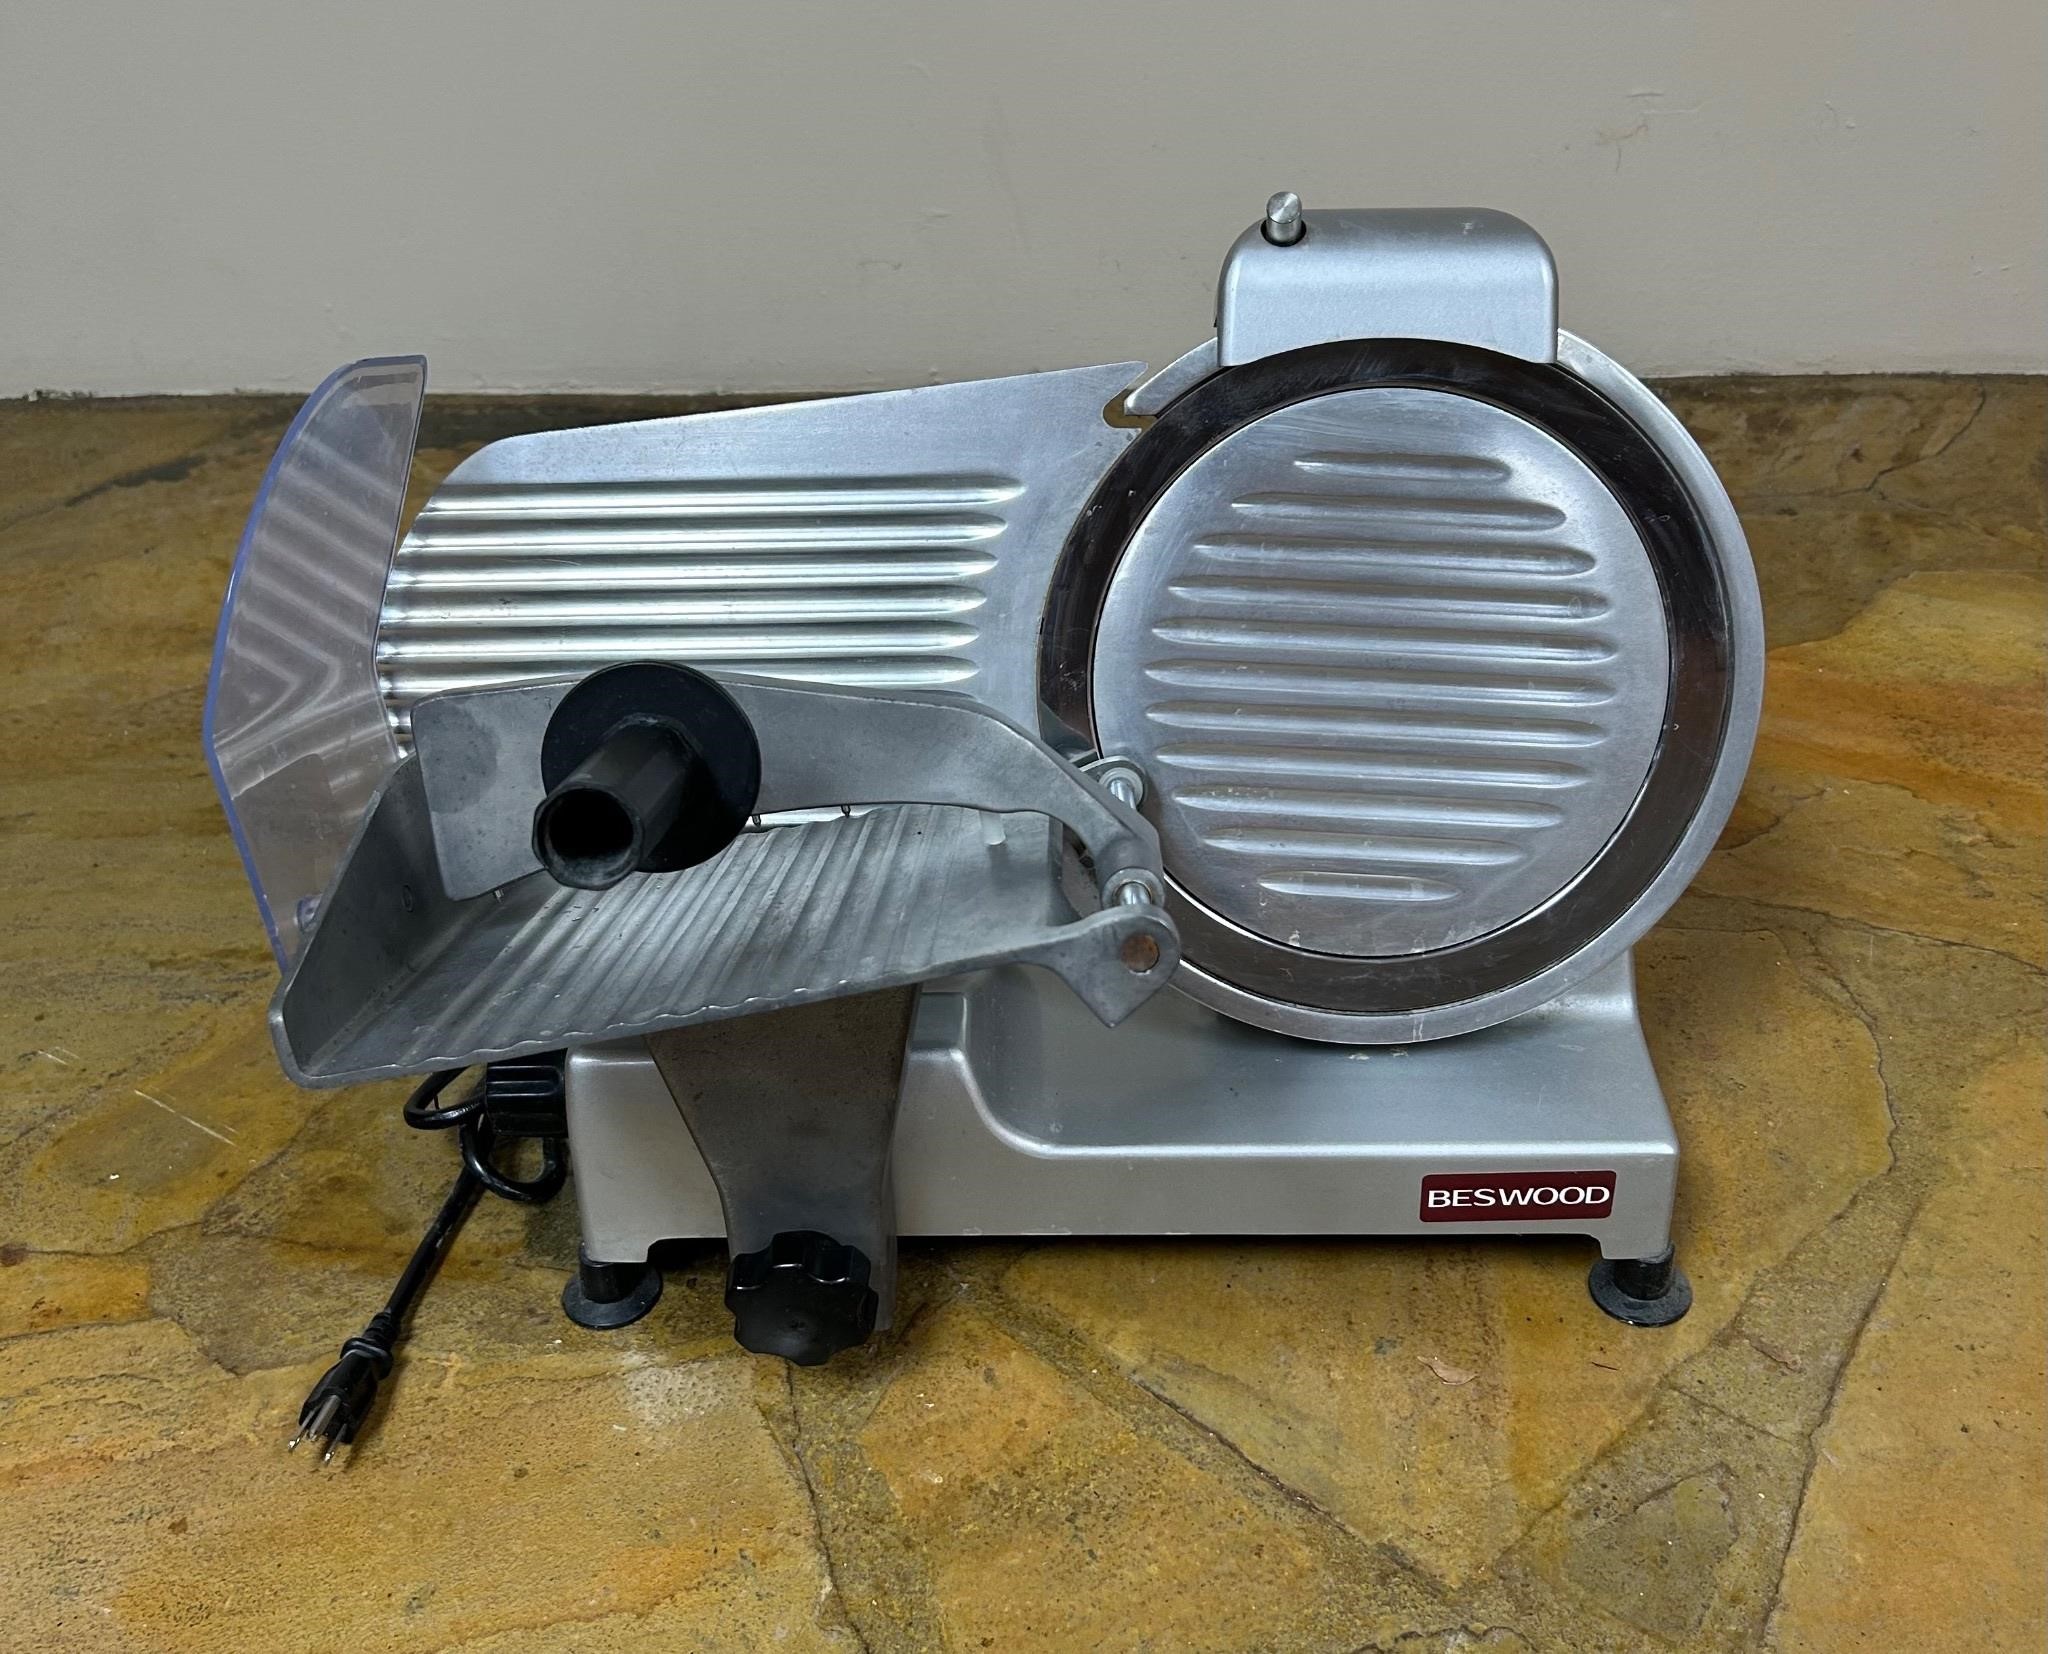 Beswood Electric Meat Slicer